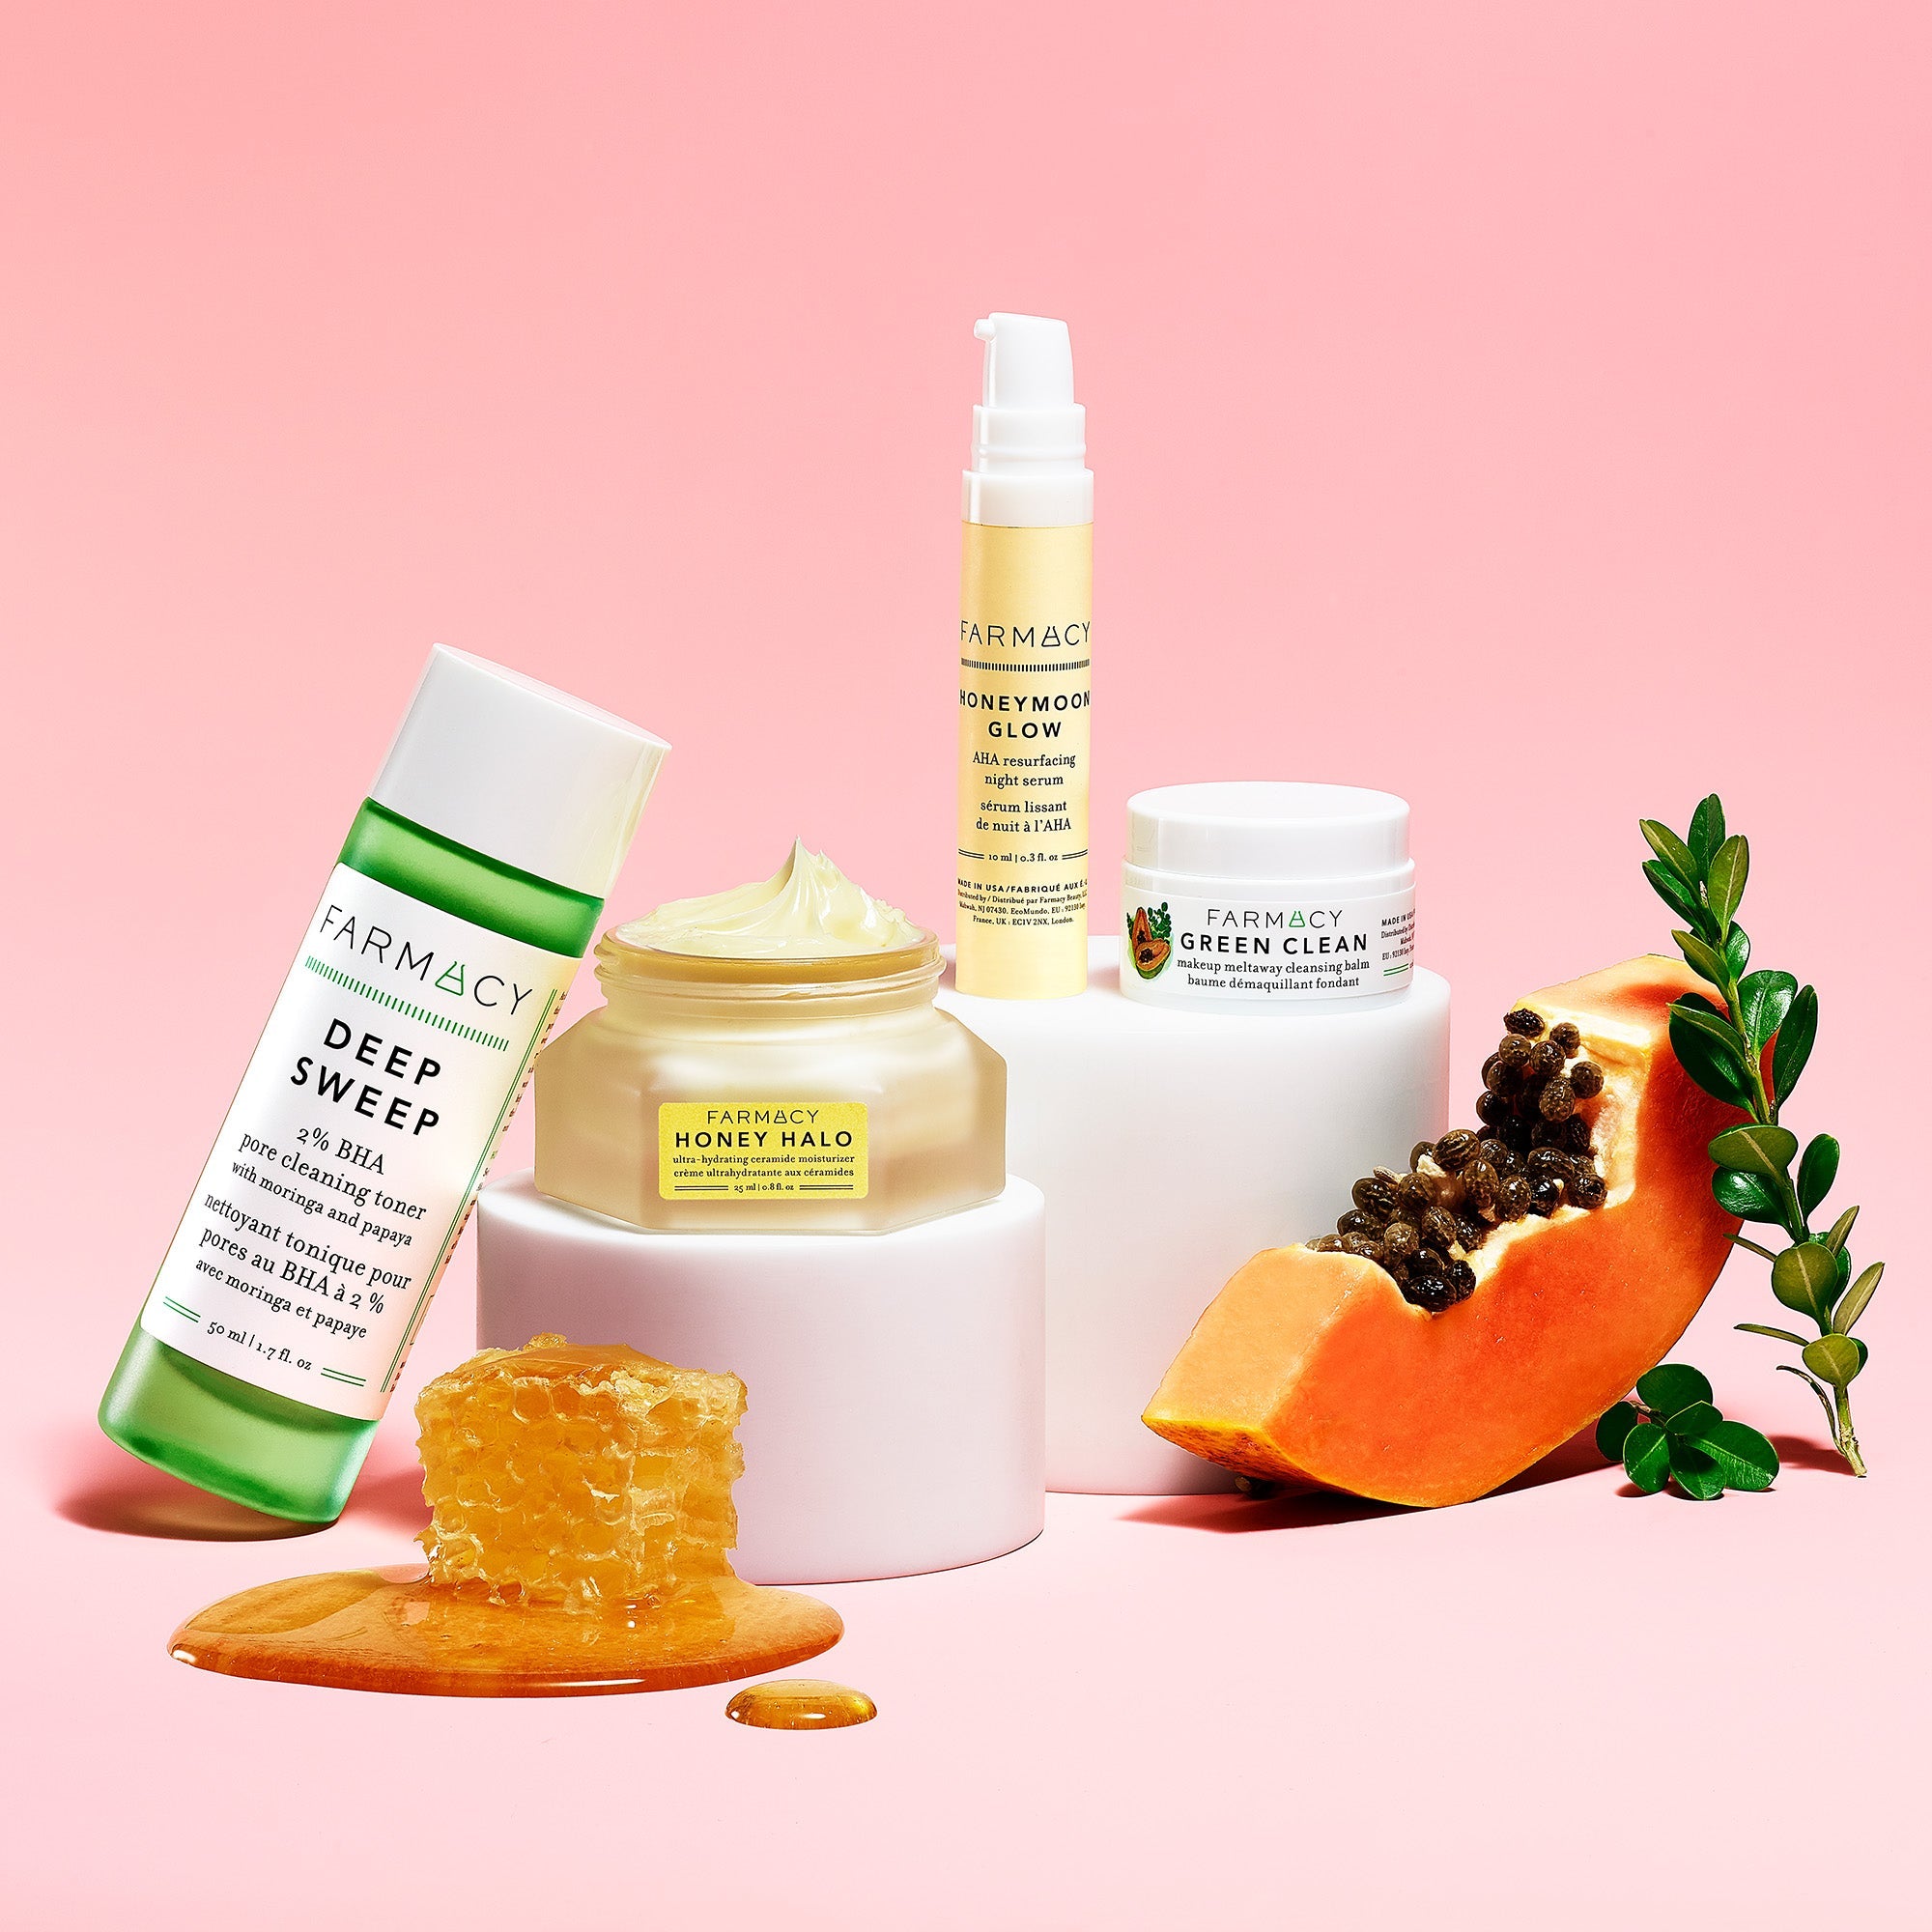 The Farmacy Healthy Skin Starter Kit with honey and turmeric